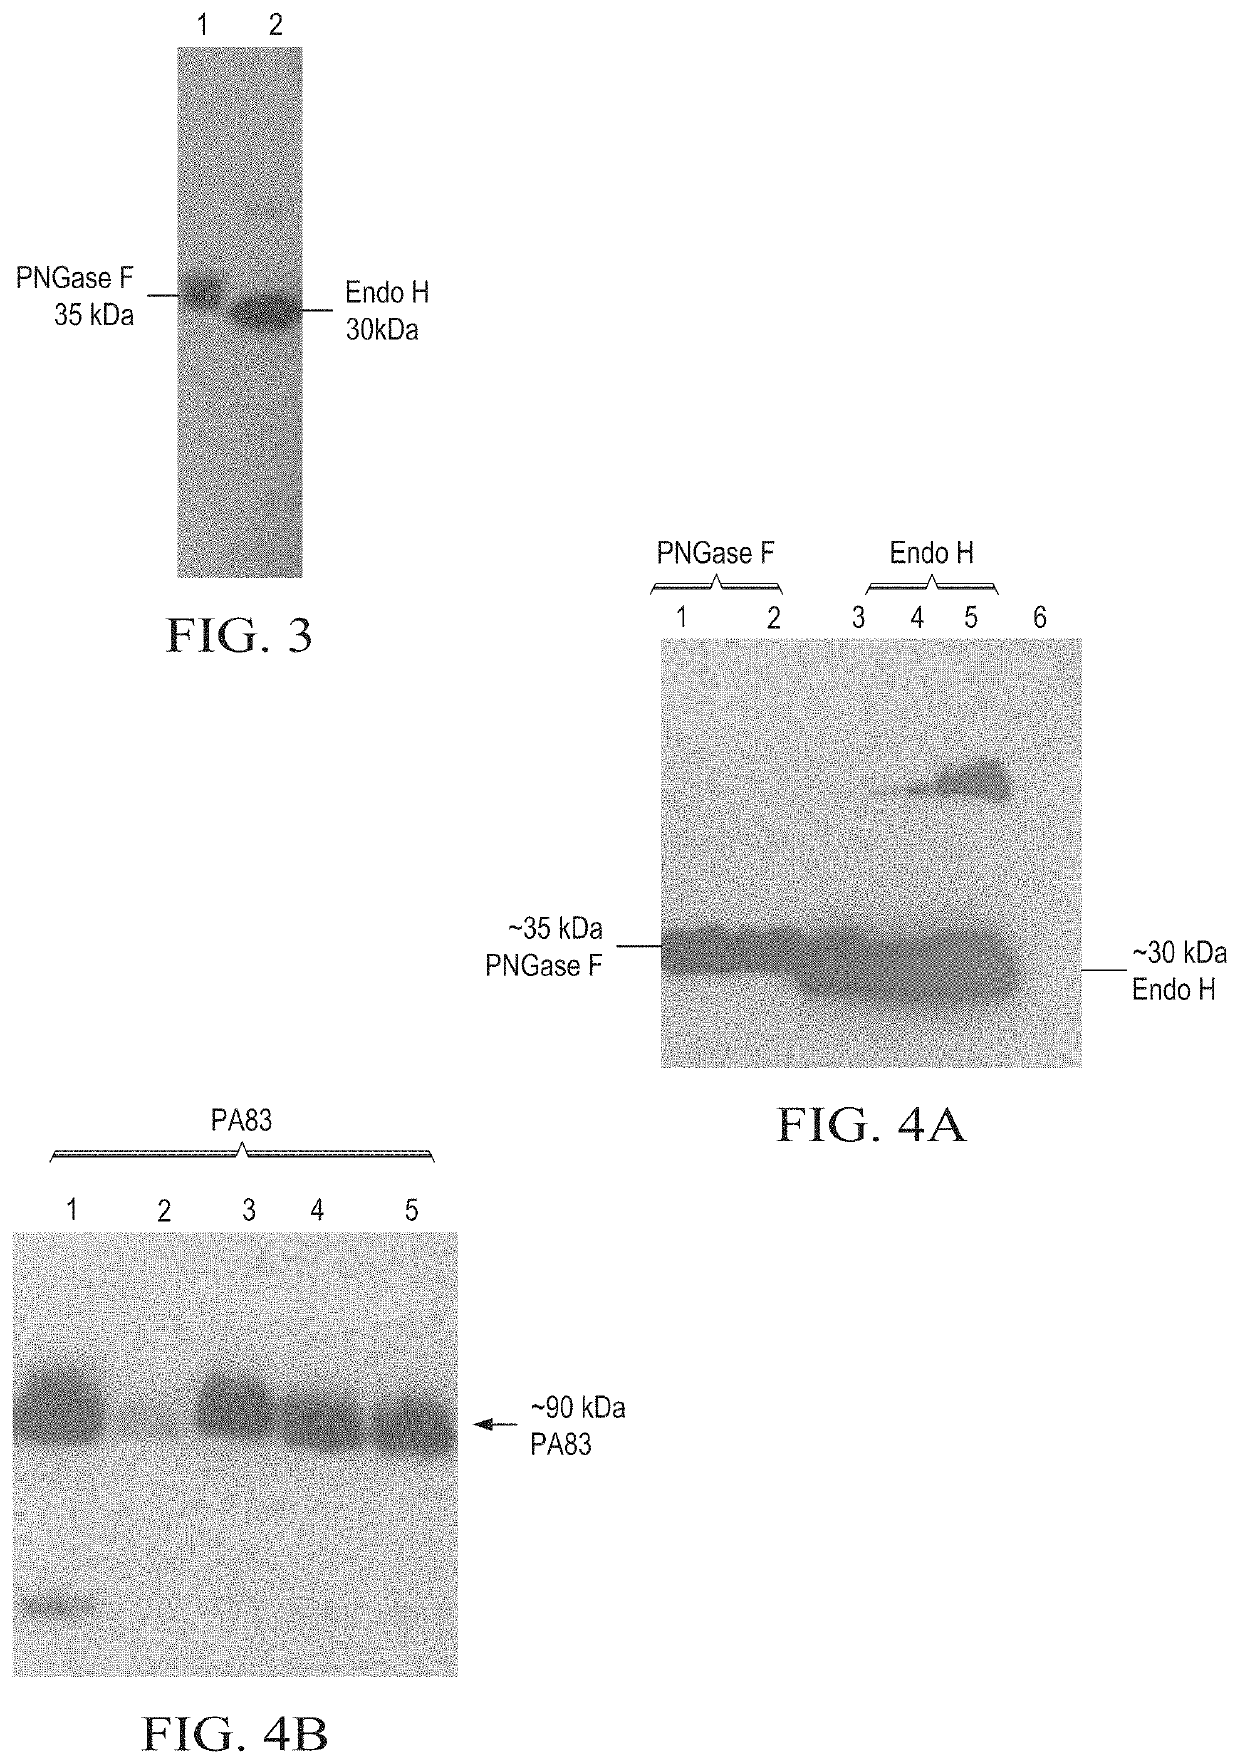 Production of in vivo N-deglycosylated recombinant proteins by co-expression with endo H